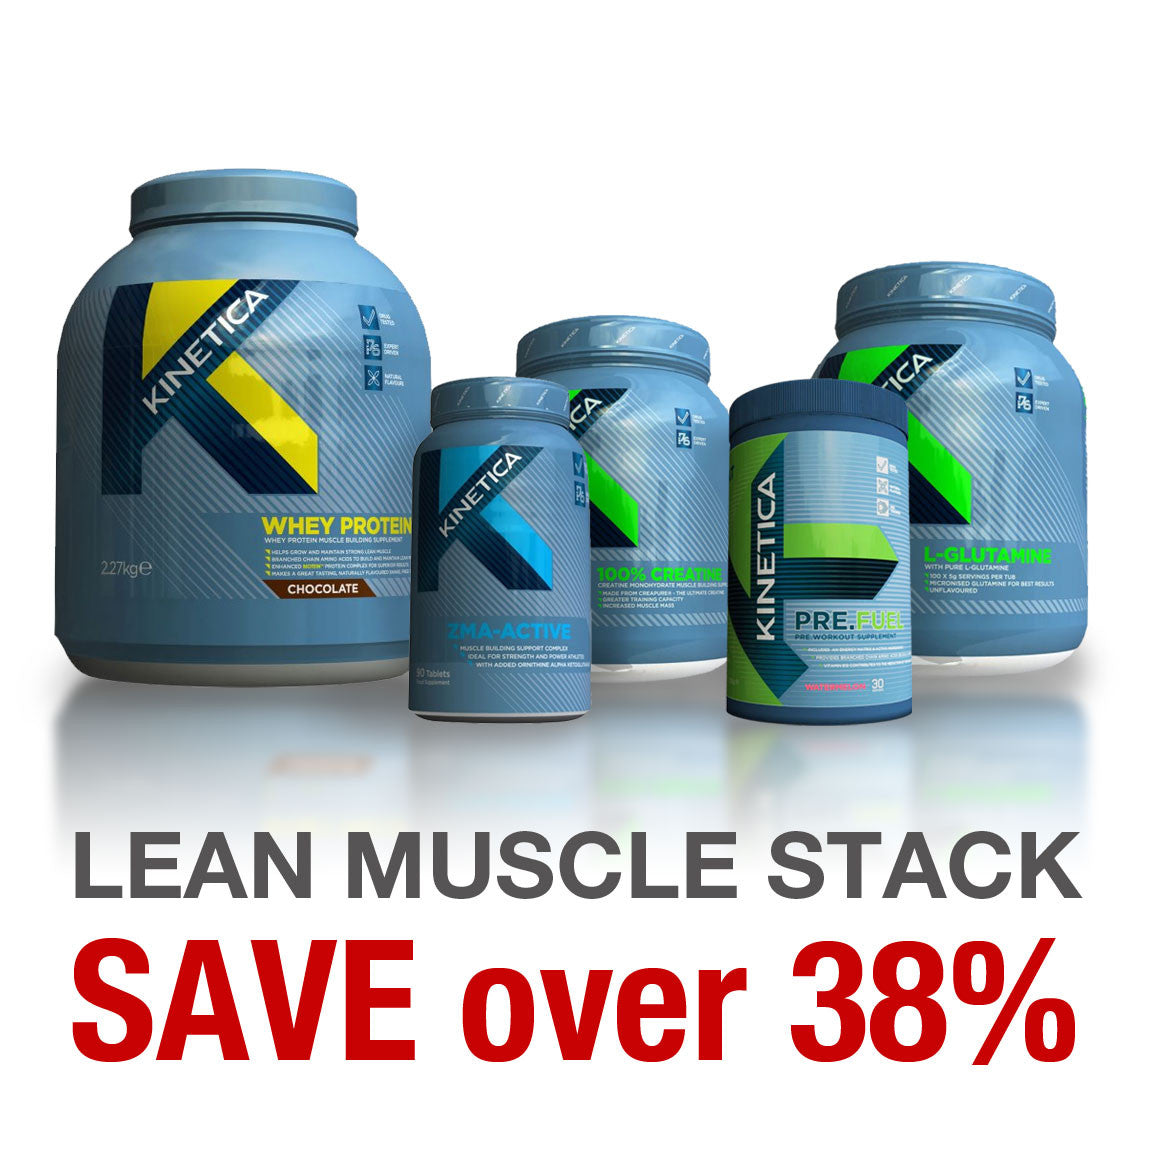 Kinetica Lean Muscle Stack